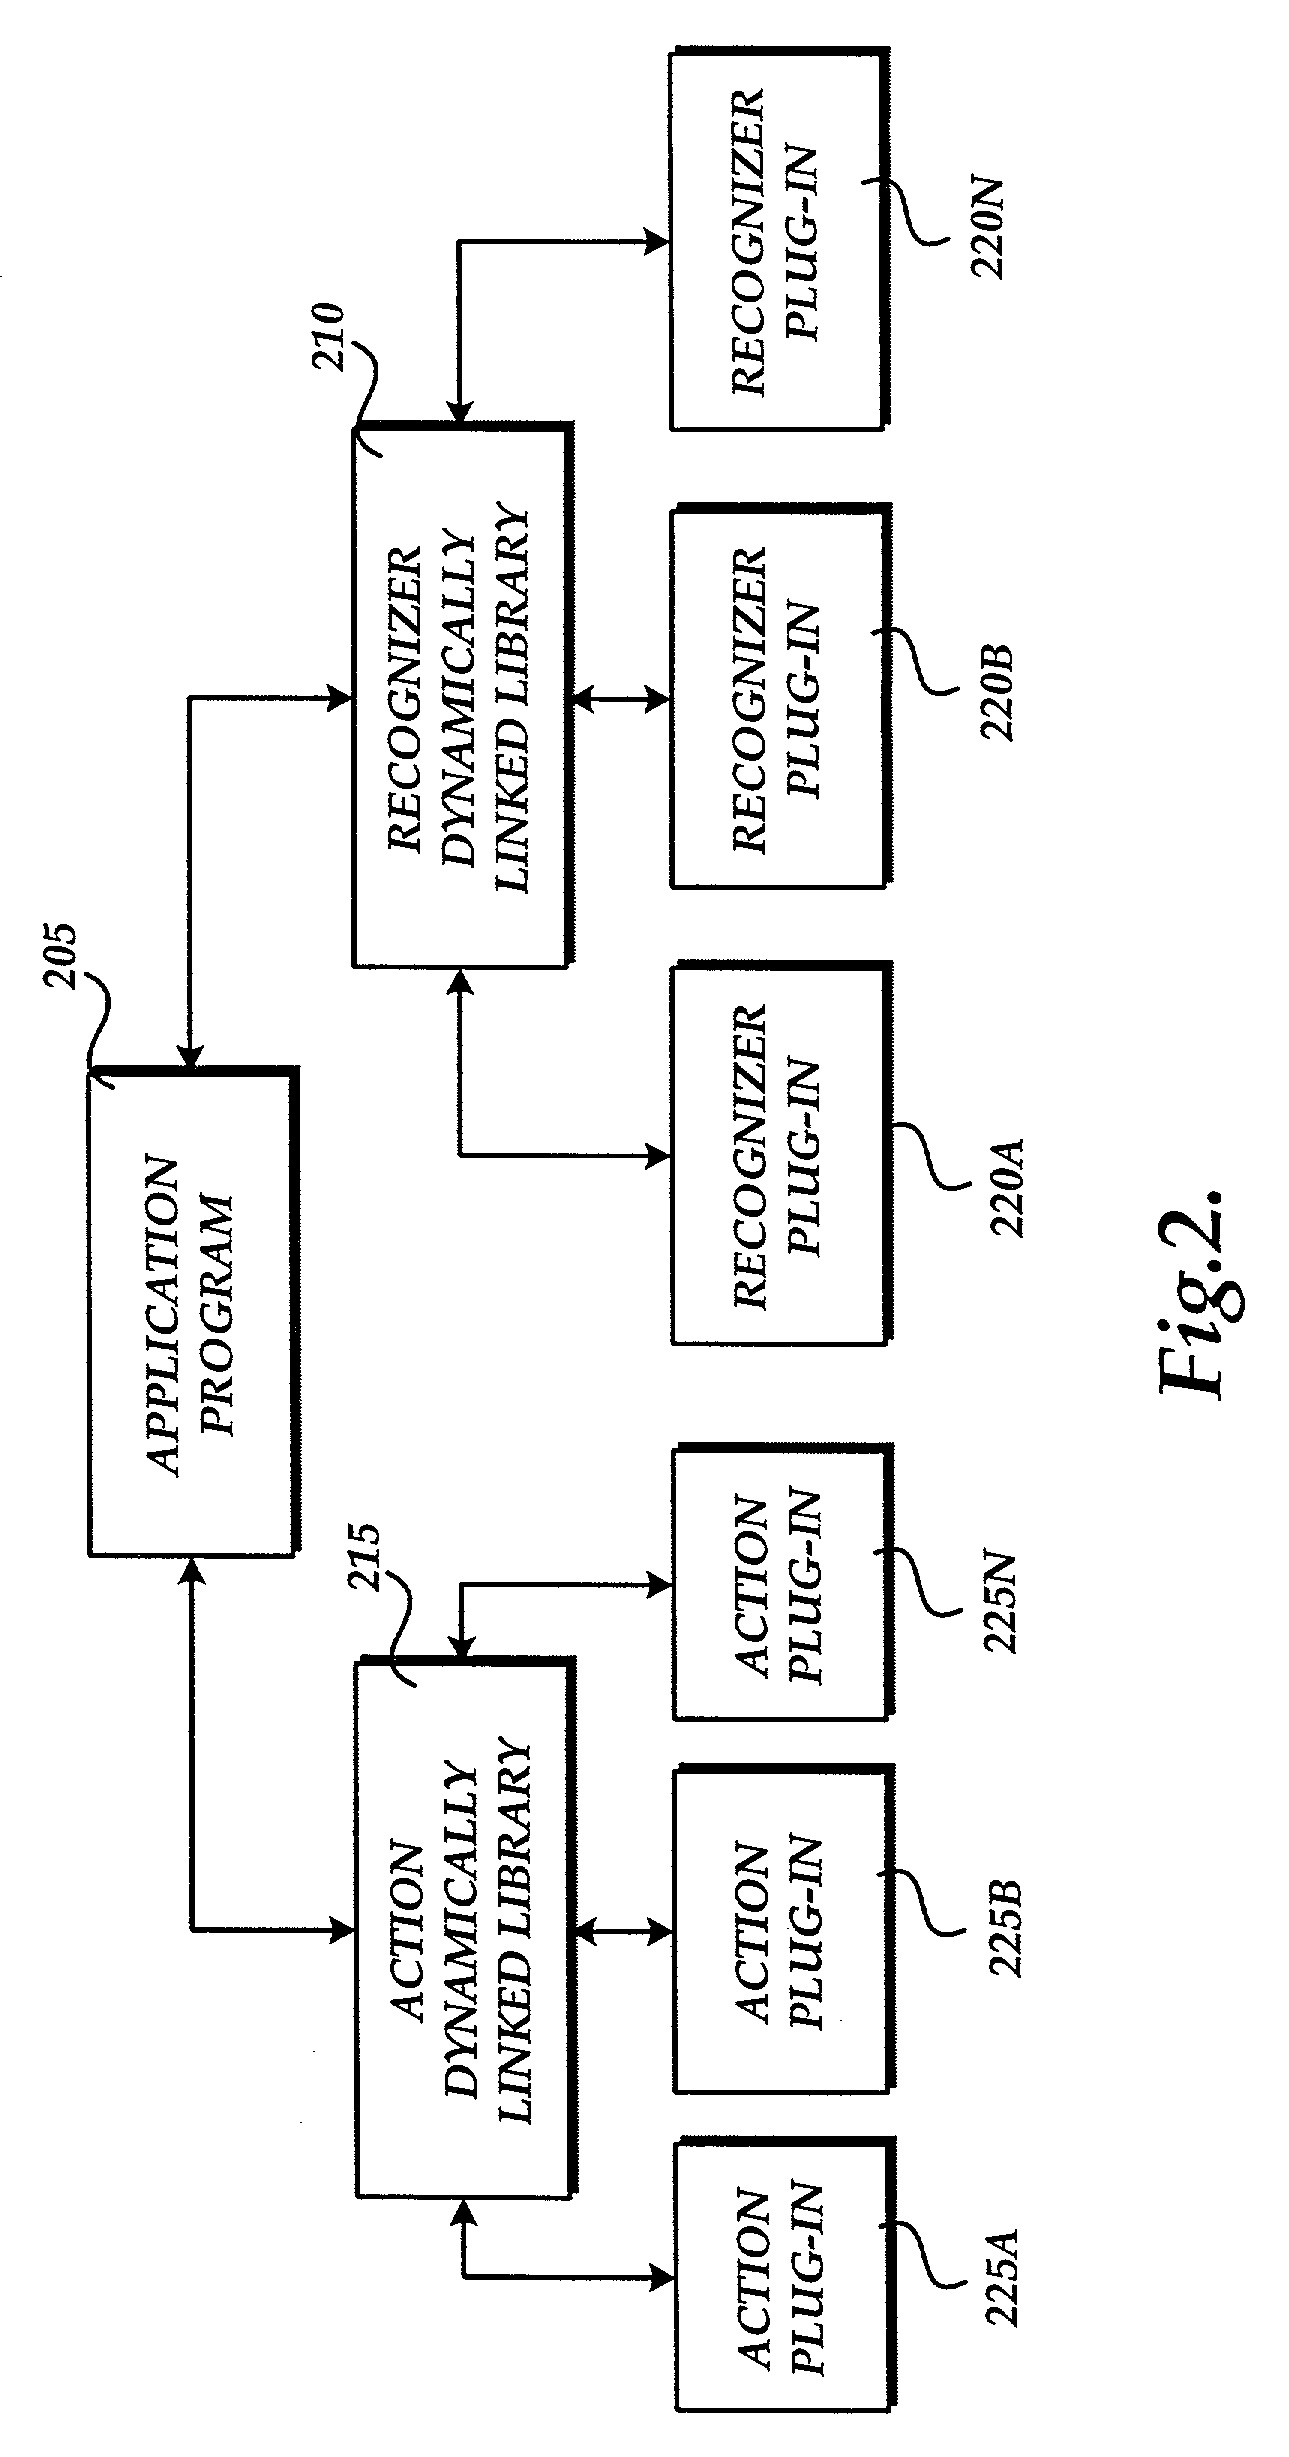 Method, system, and apparatus for converting dates between calendars and languages based upon semantically labeled strings